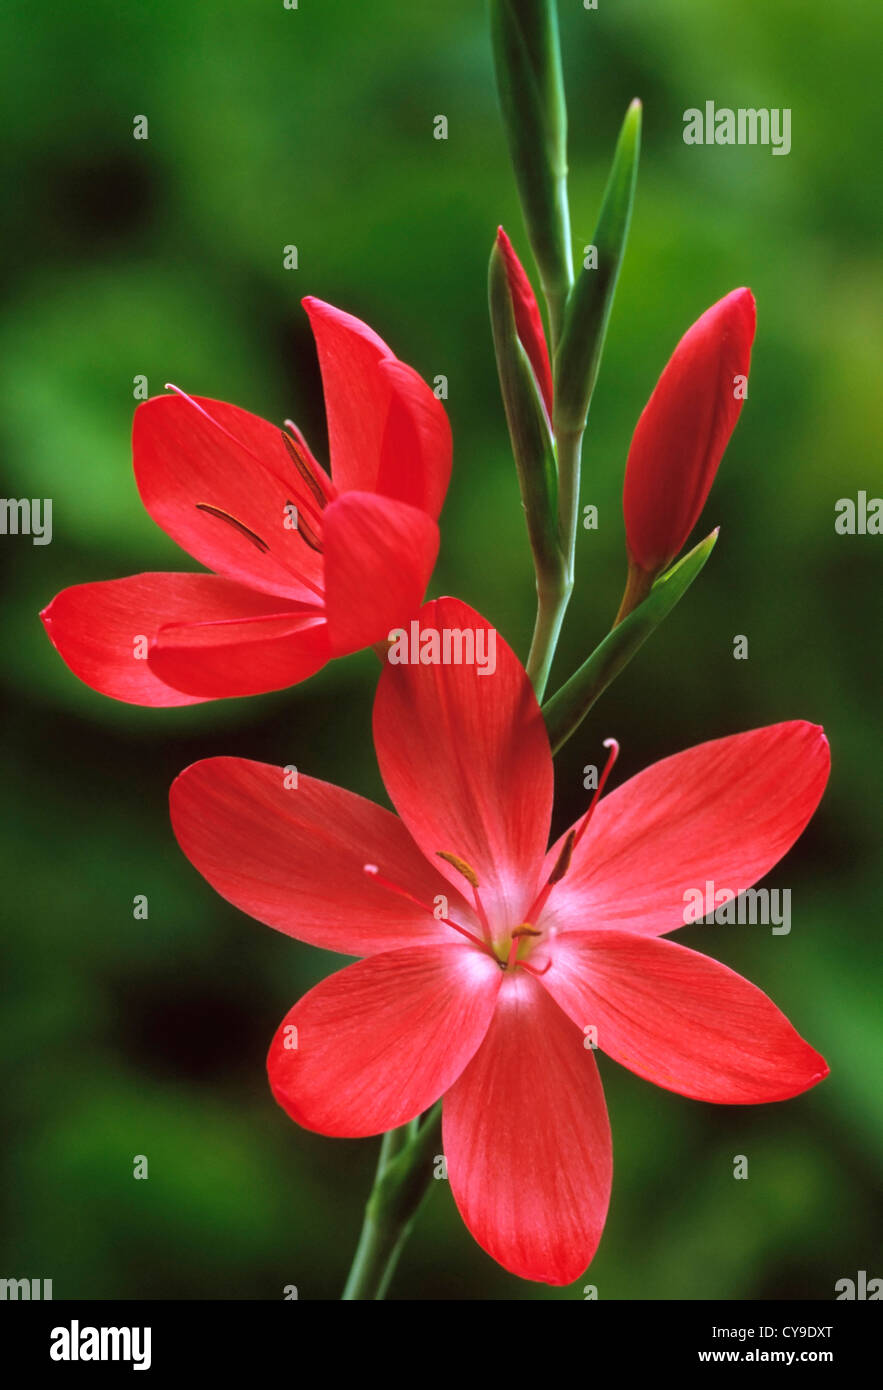 Schizostylis coccinea 'Major', Kaffir lily, Red flowers and buds on a single stem against a green background. Stock Photo